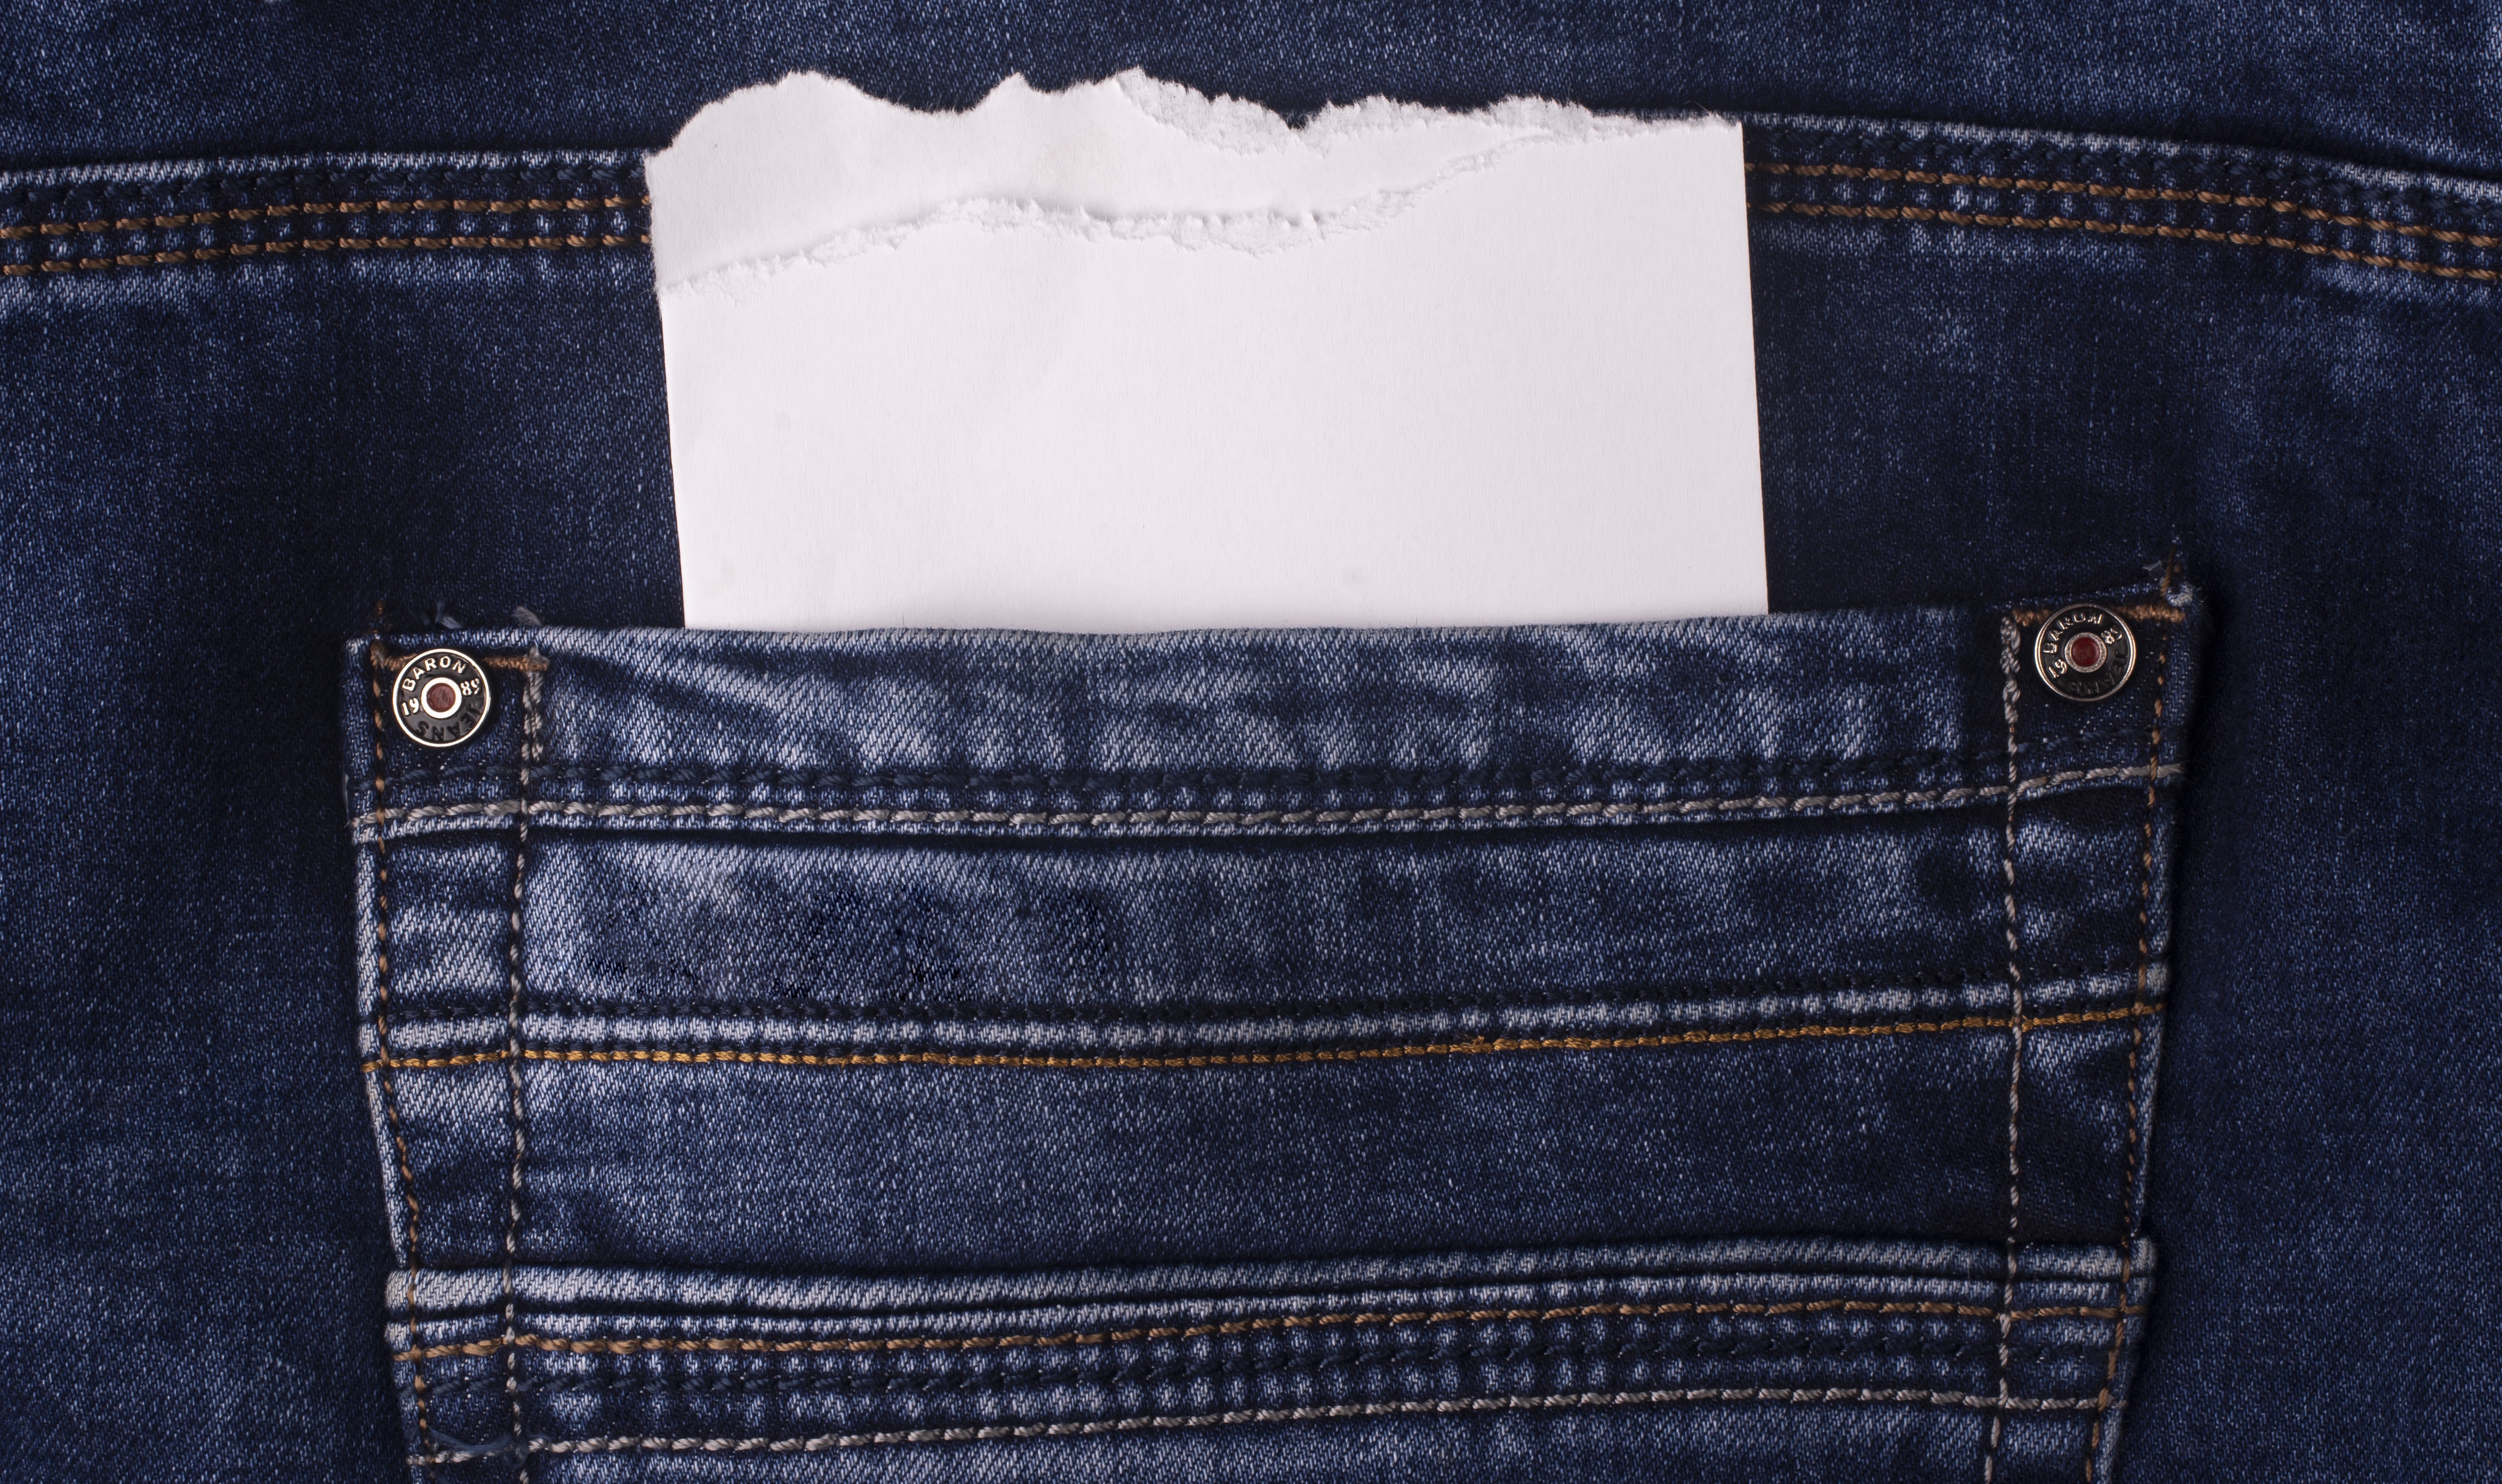 Receipt inside a pocket | Source: Getty Images